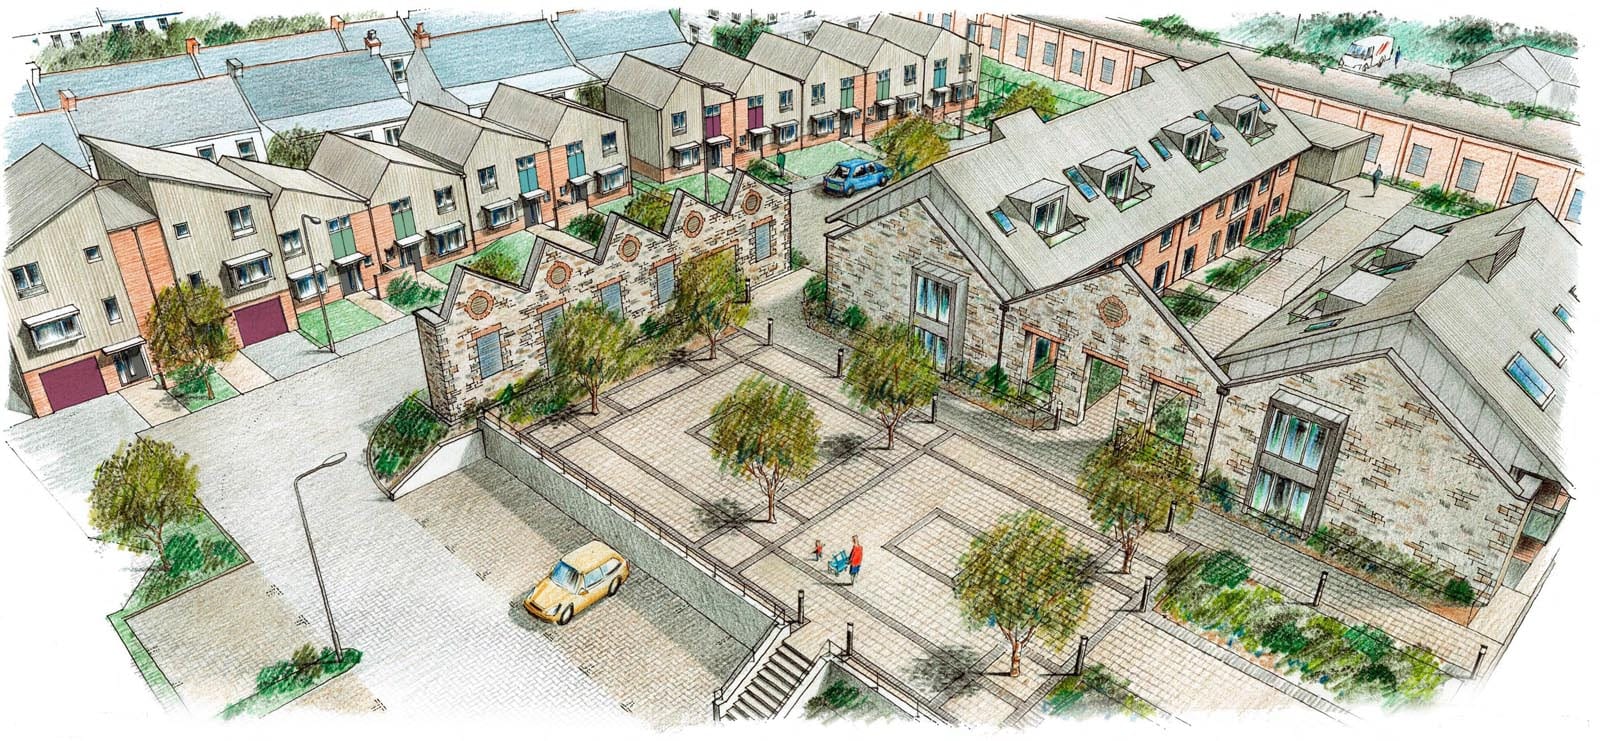 Mixed use housing development aerial sketch